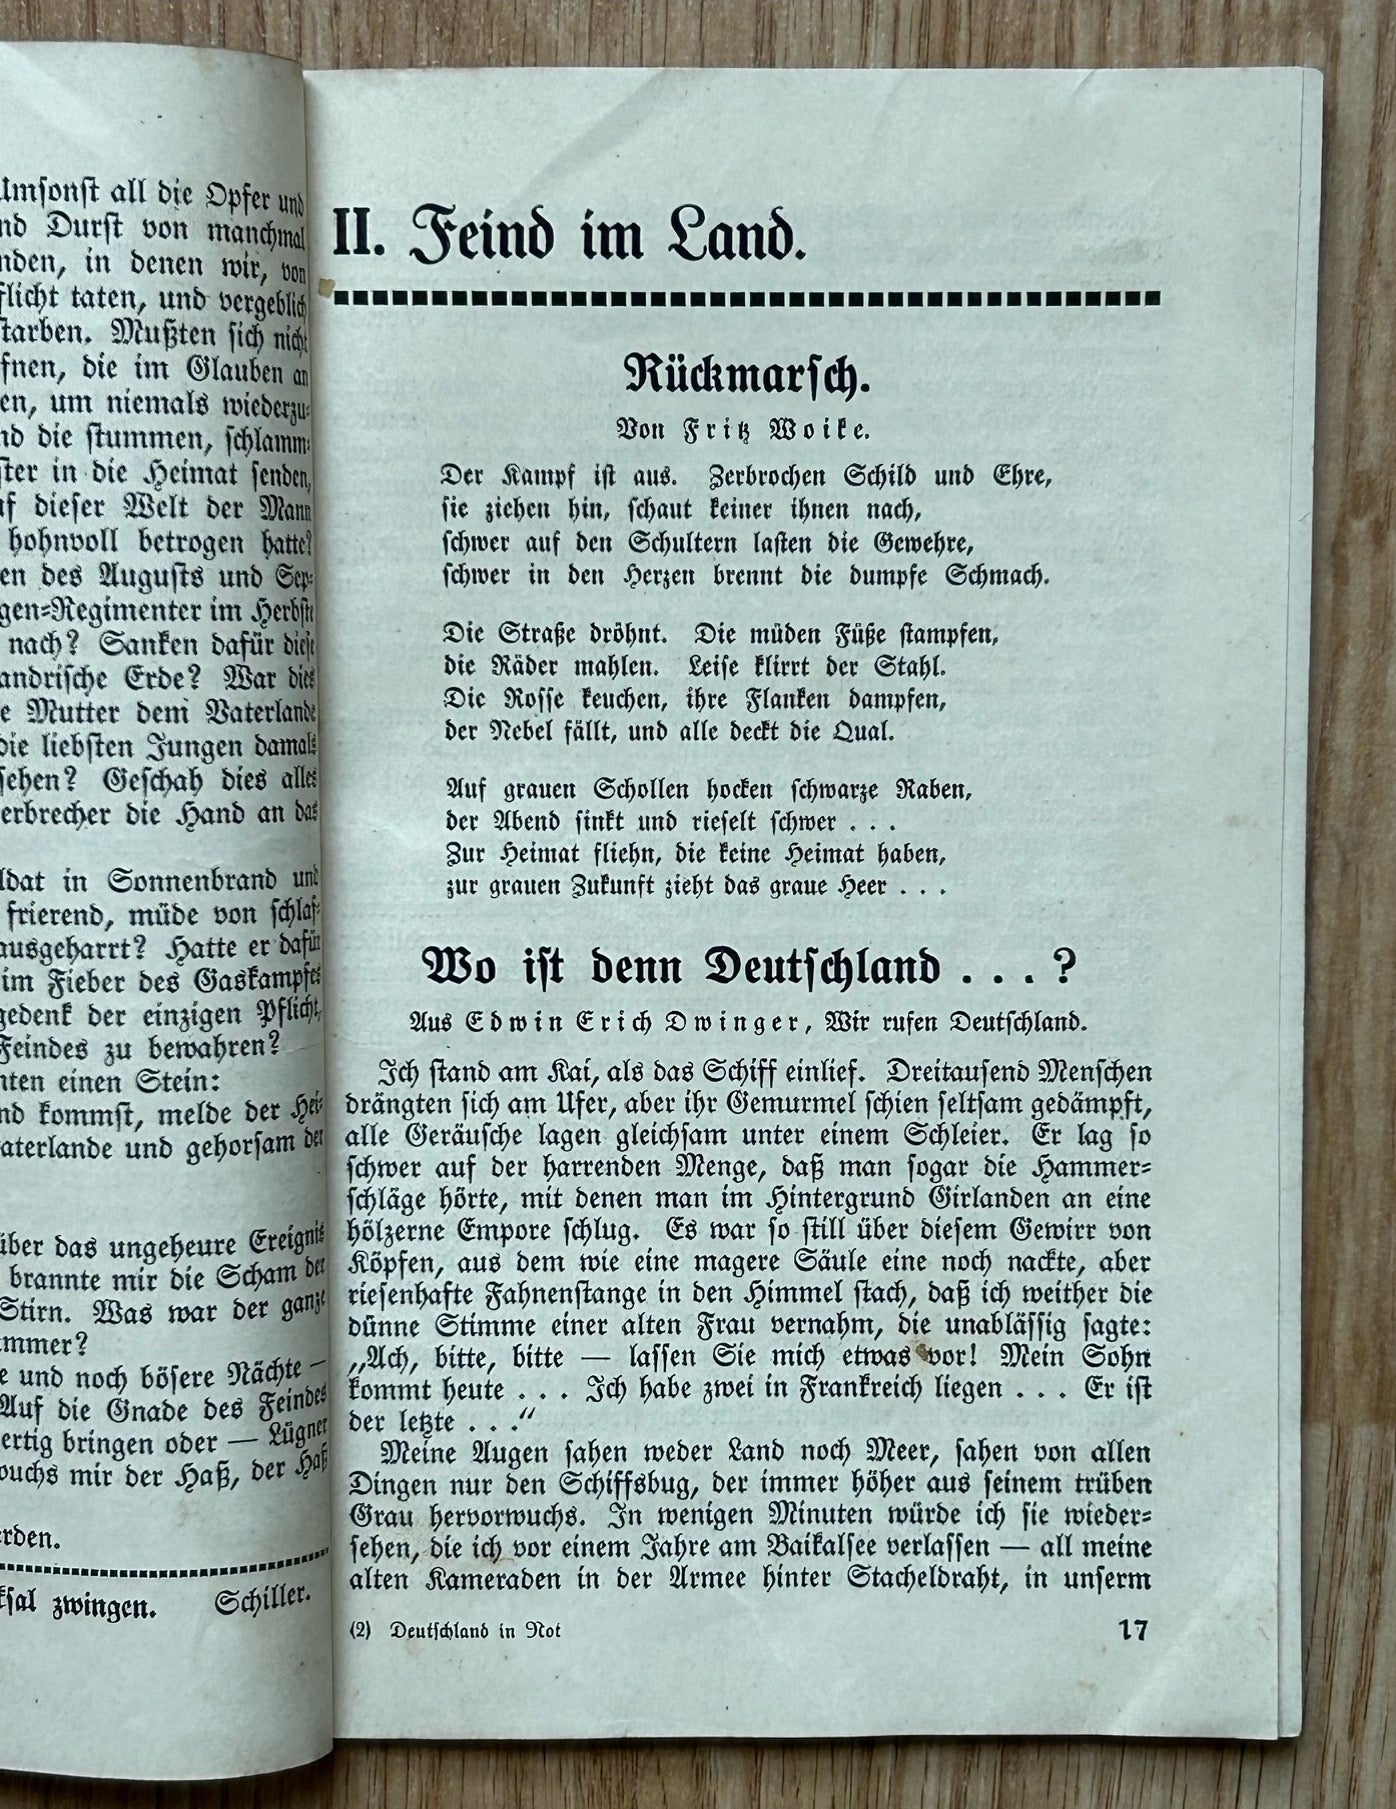 Deutschland in Not - 1935 book of speeches and quotes